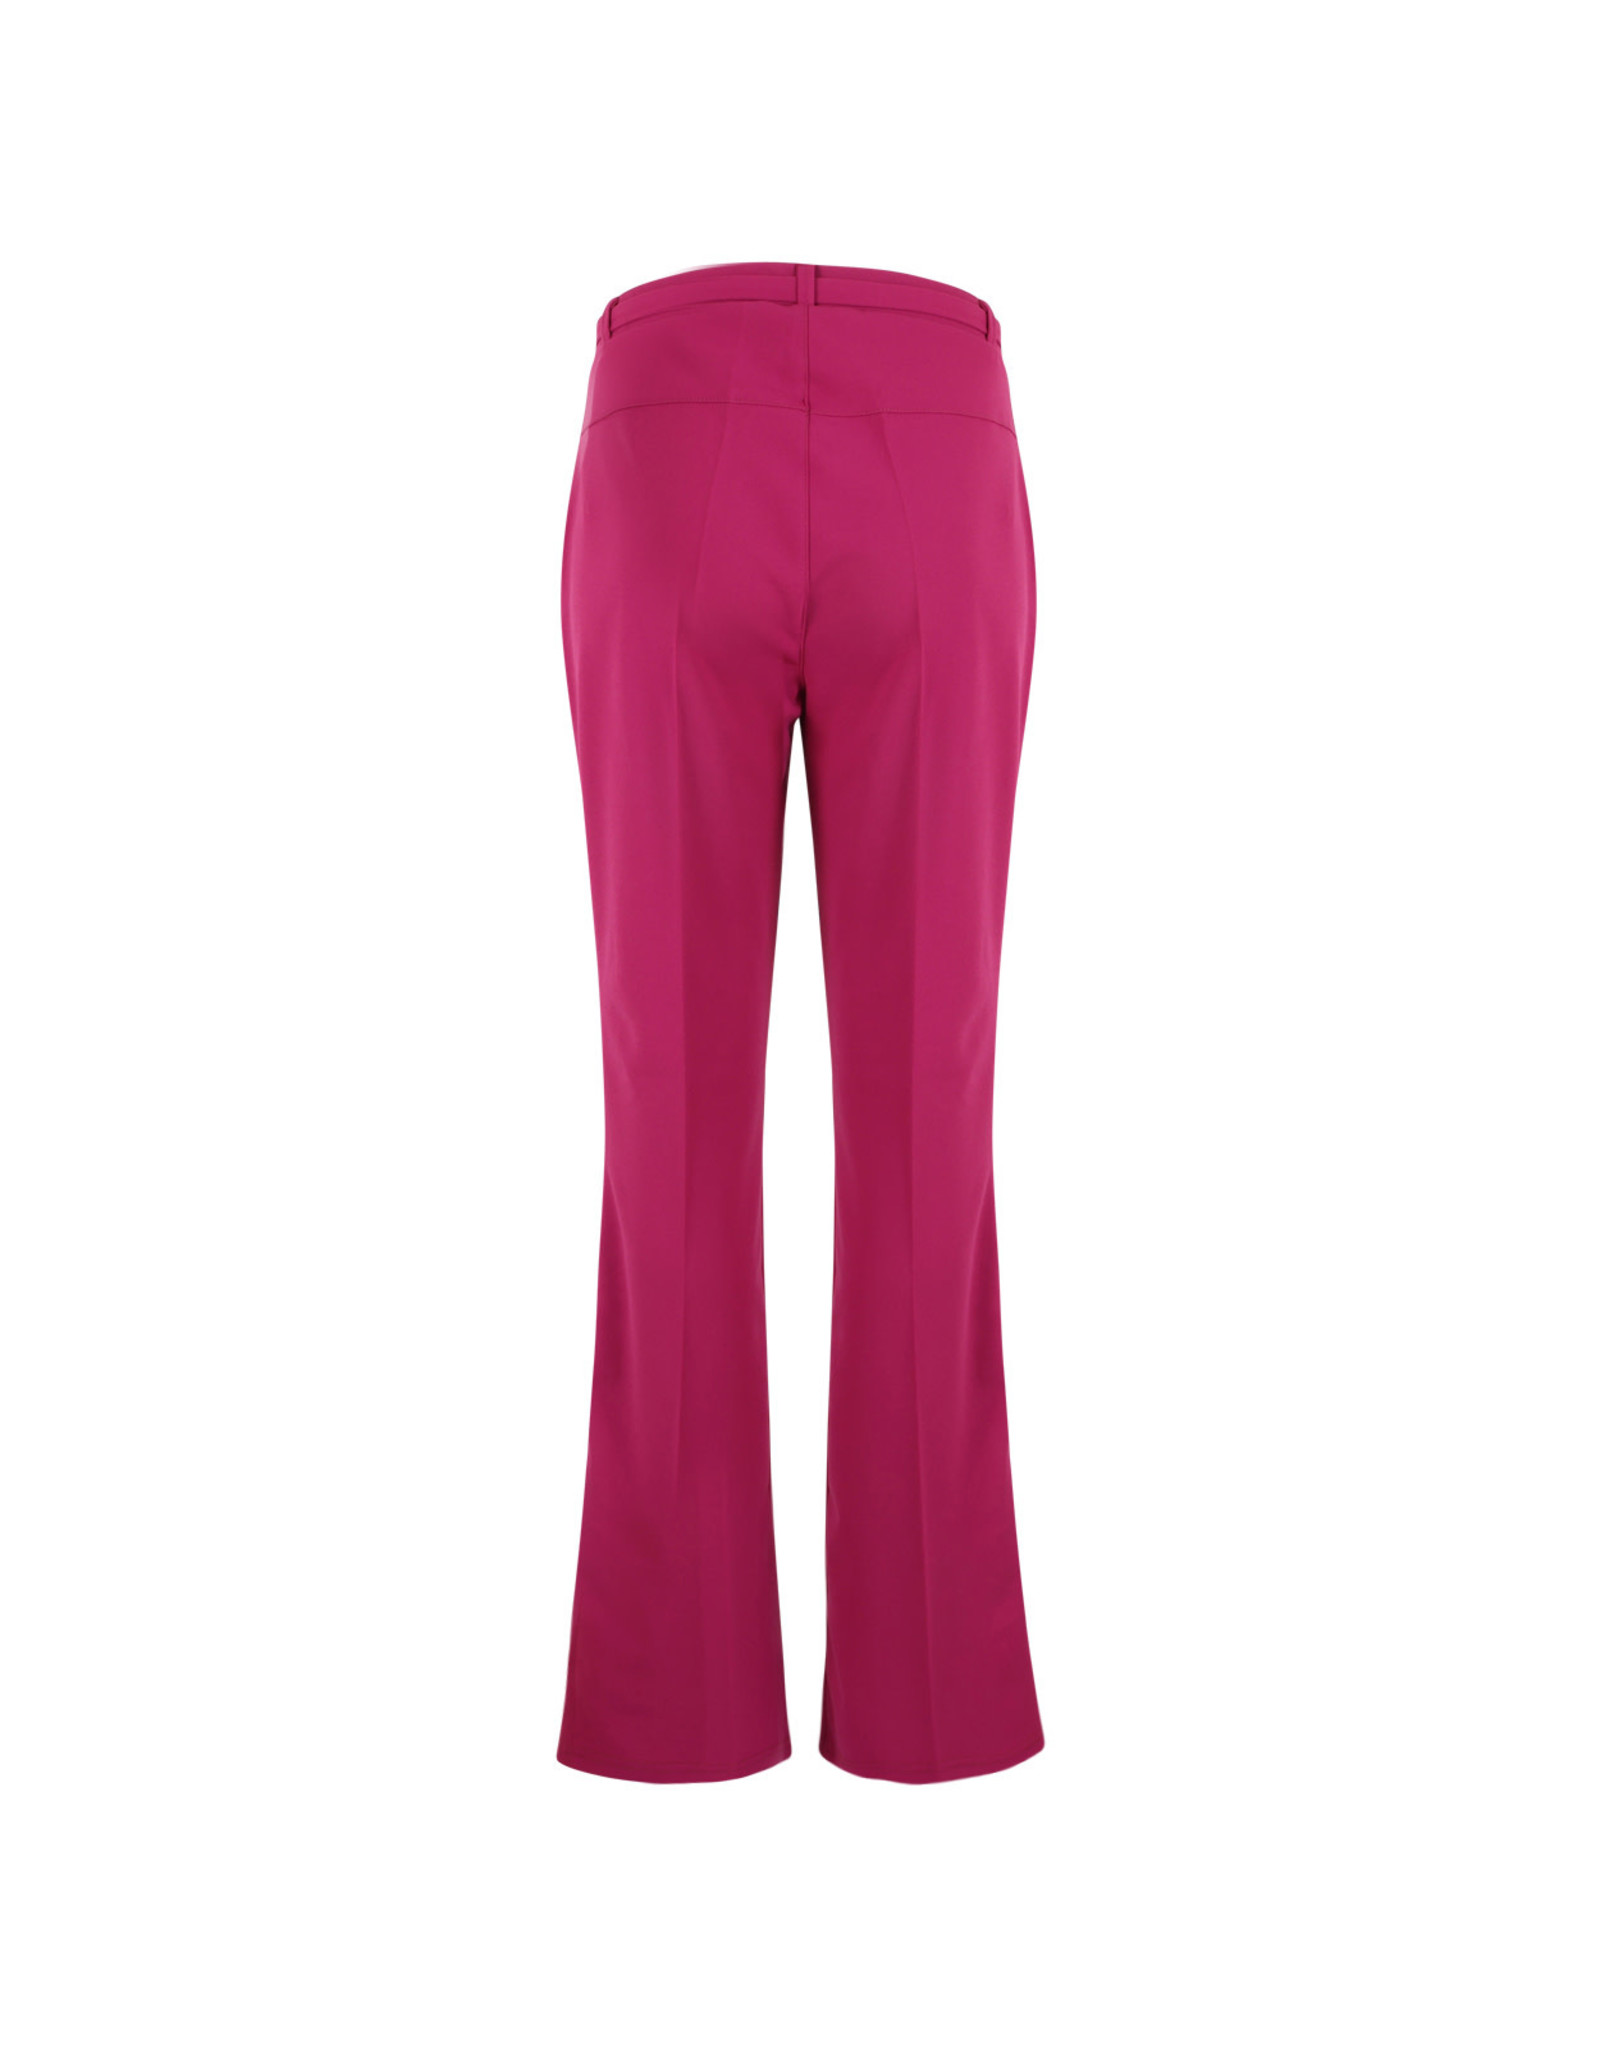 br&dy BR&DY Olive pants flared pink